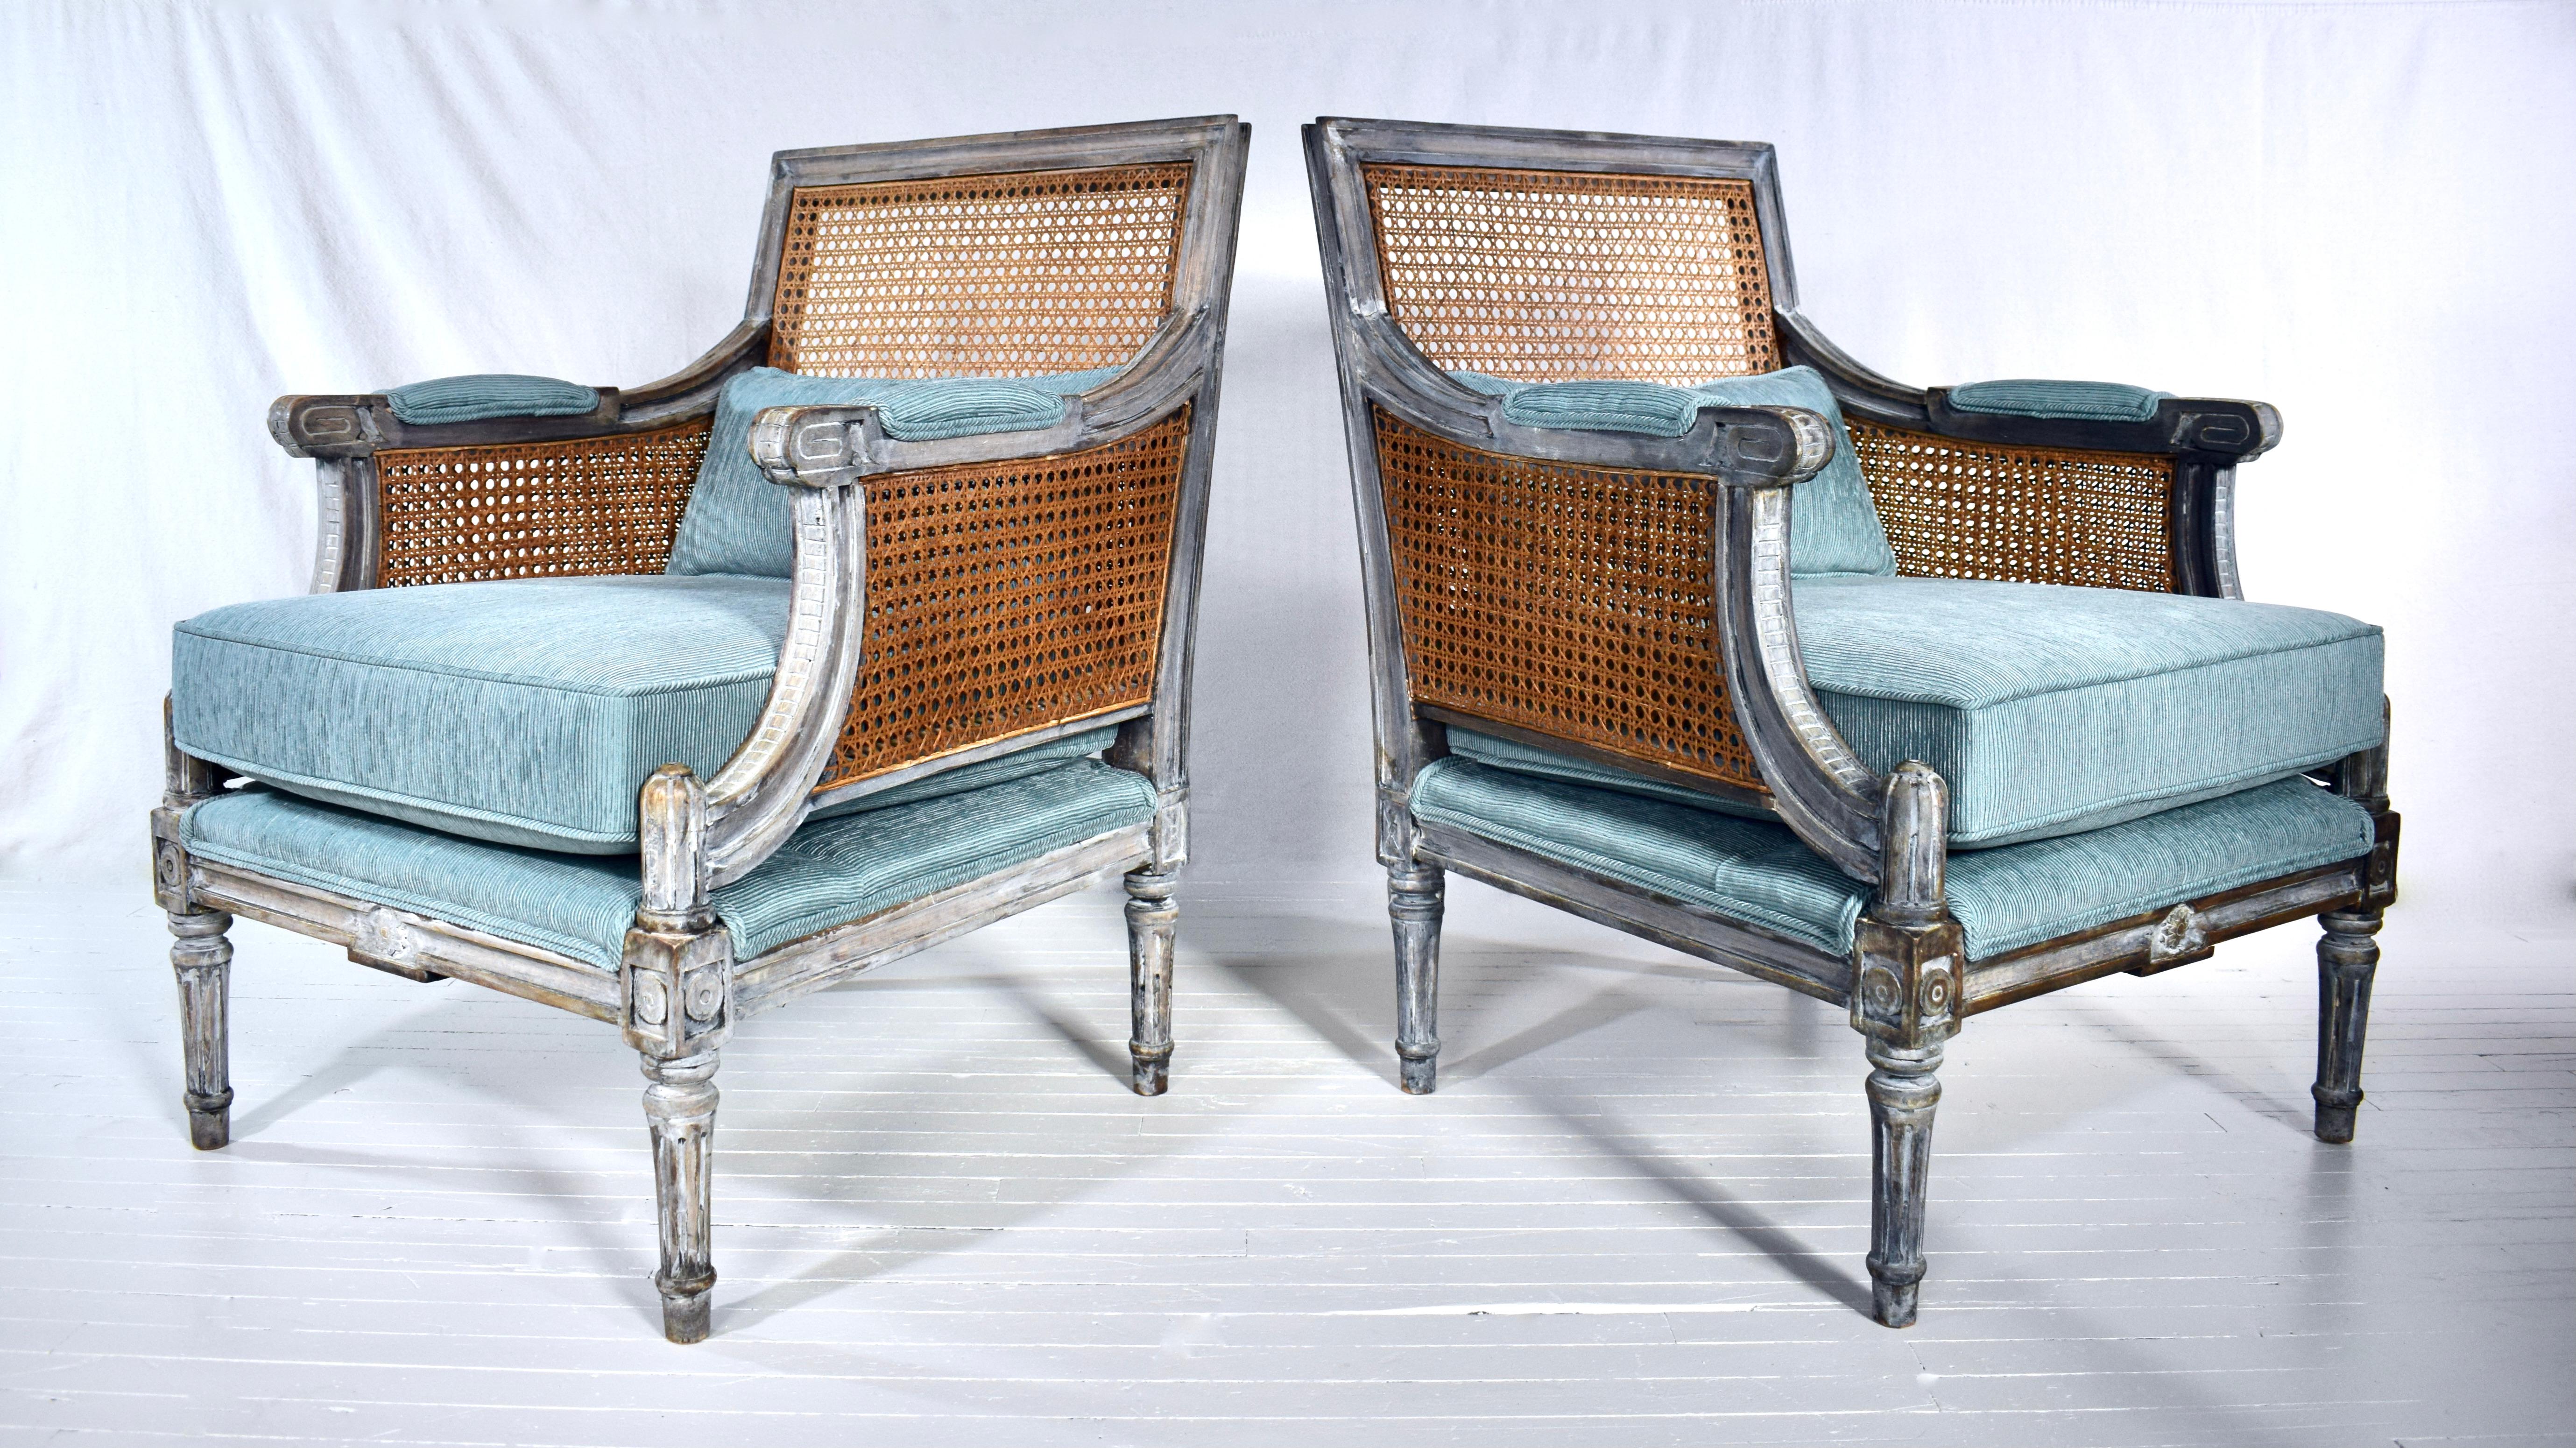 A fully restored pair of French Louis XVI style Bergere Chairs in new French Blue textured upholstery. Exquisite features include double caned arms, caned back, custom bolster cushion & carved frames with intensionally distressed painted finish;